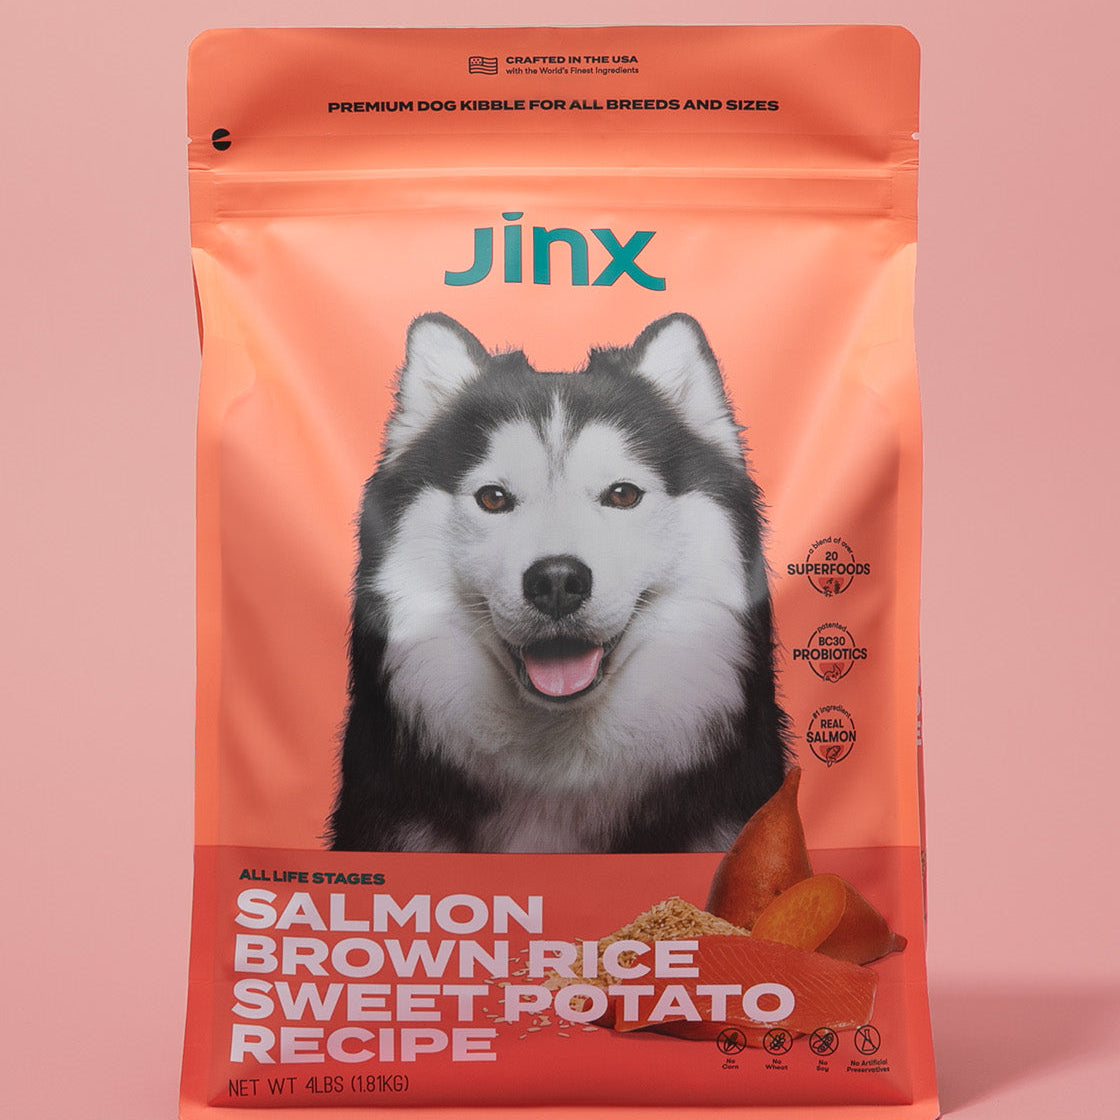 Salmon essentials Jinx bundle including Salmon, brown rice, sweet potato Jinx dog kibble product packaging on a pink background.